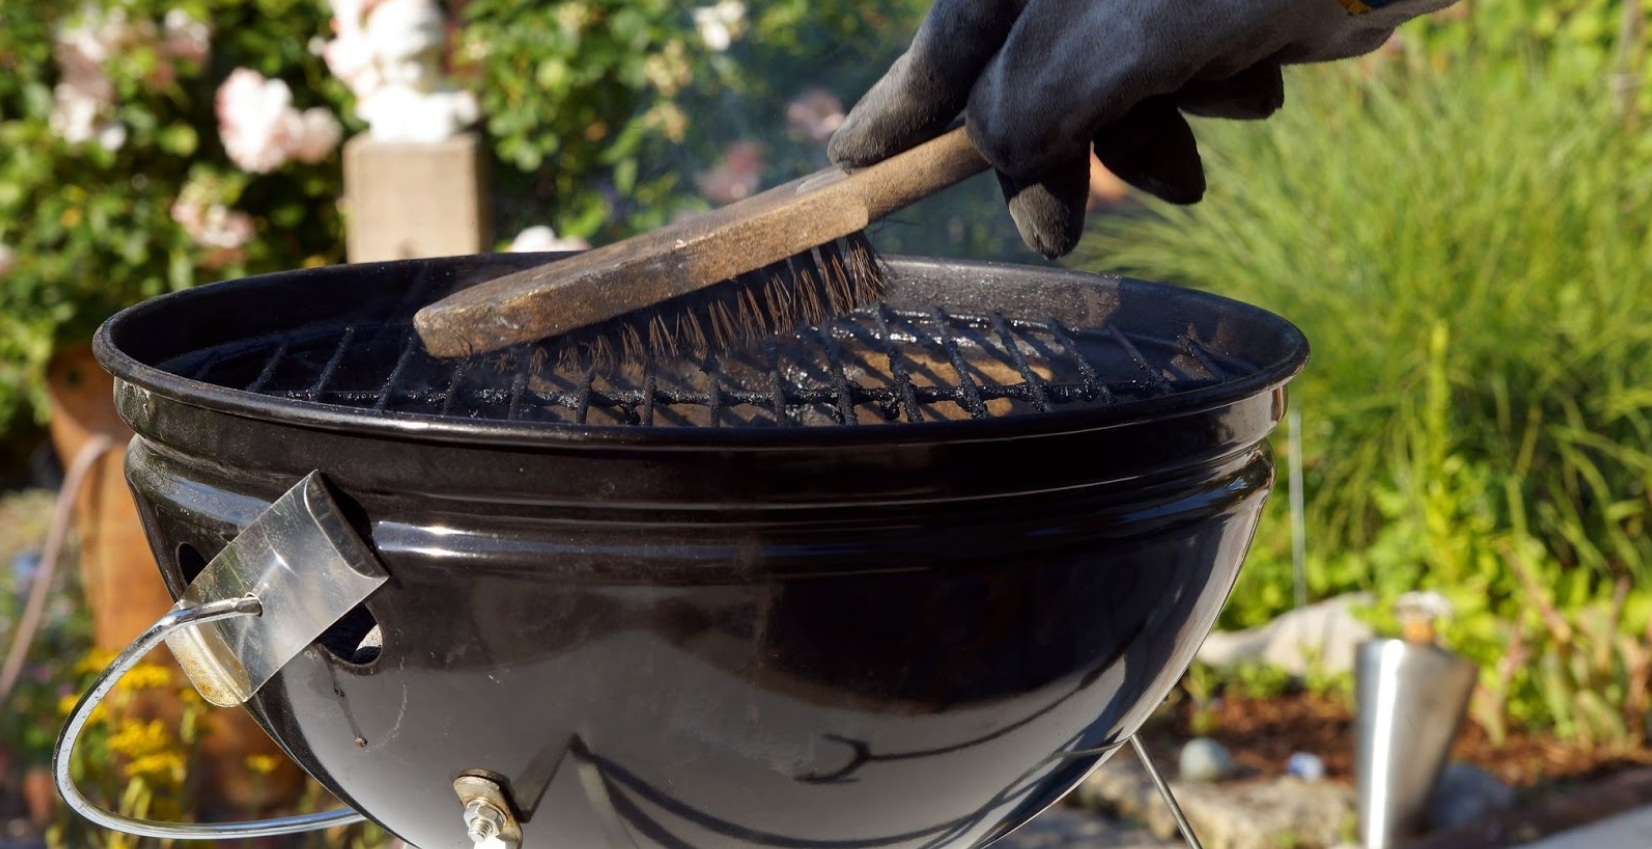 How to Clean Your Grill for Perfect Barbecues?